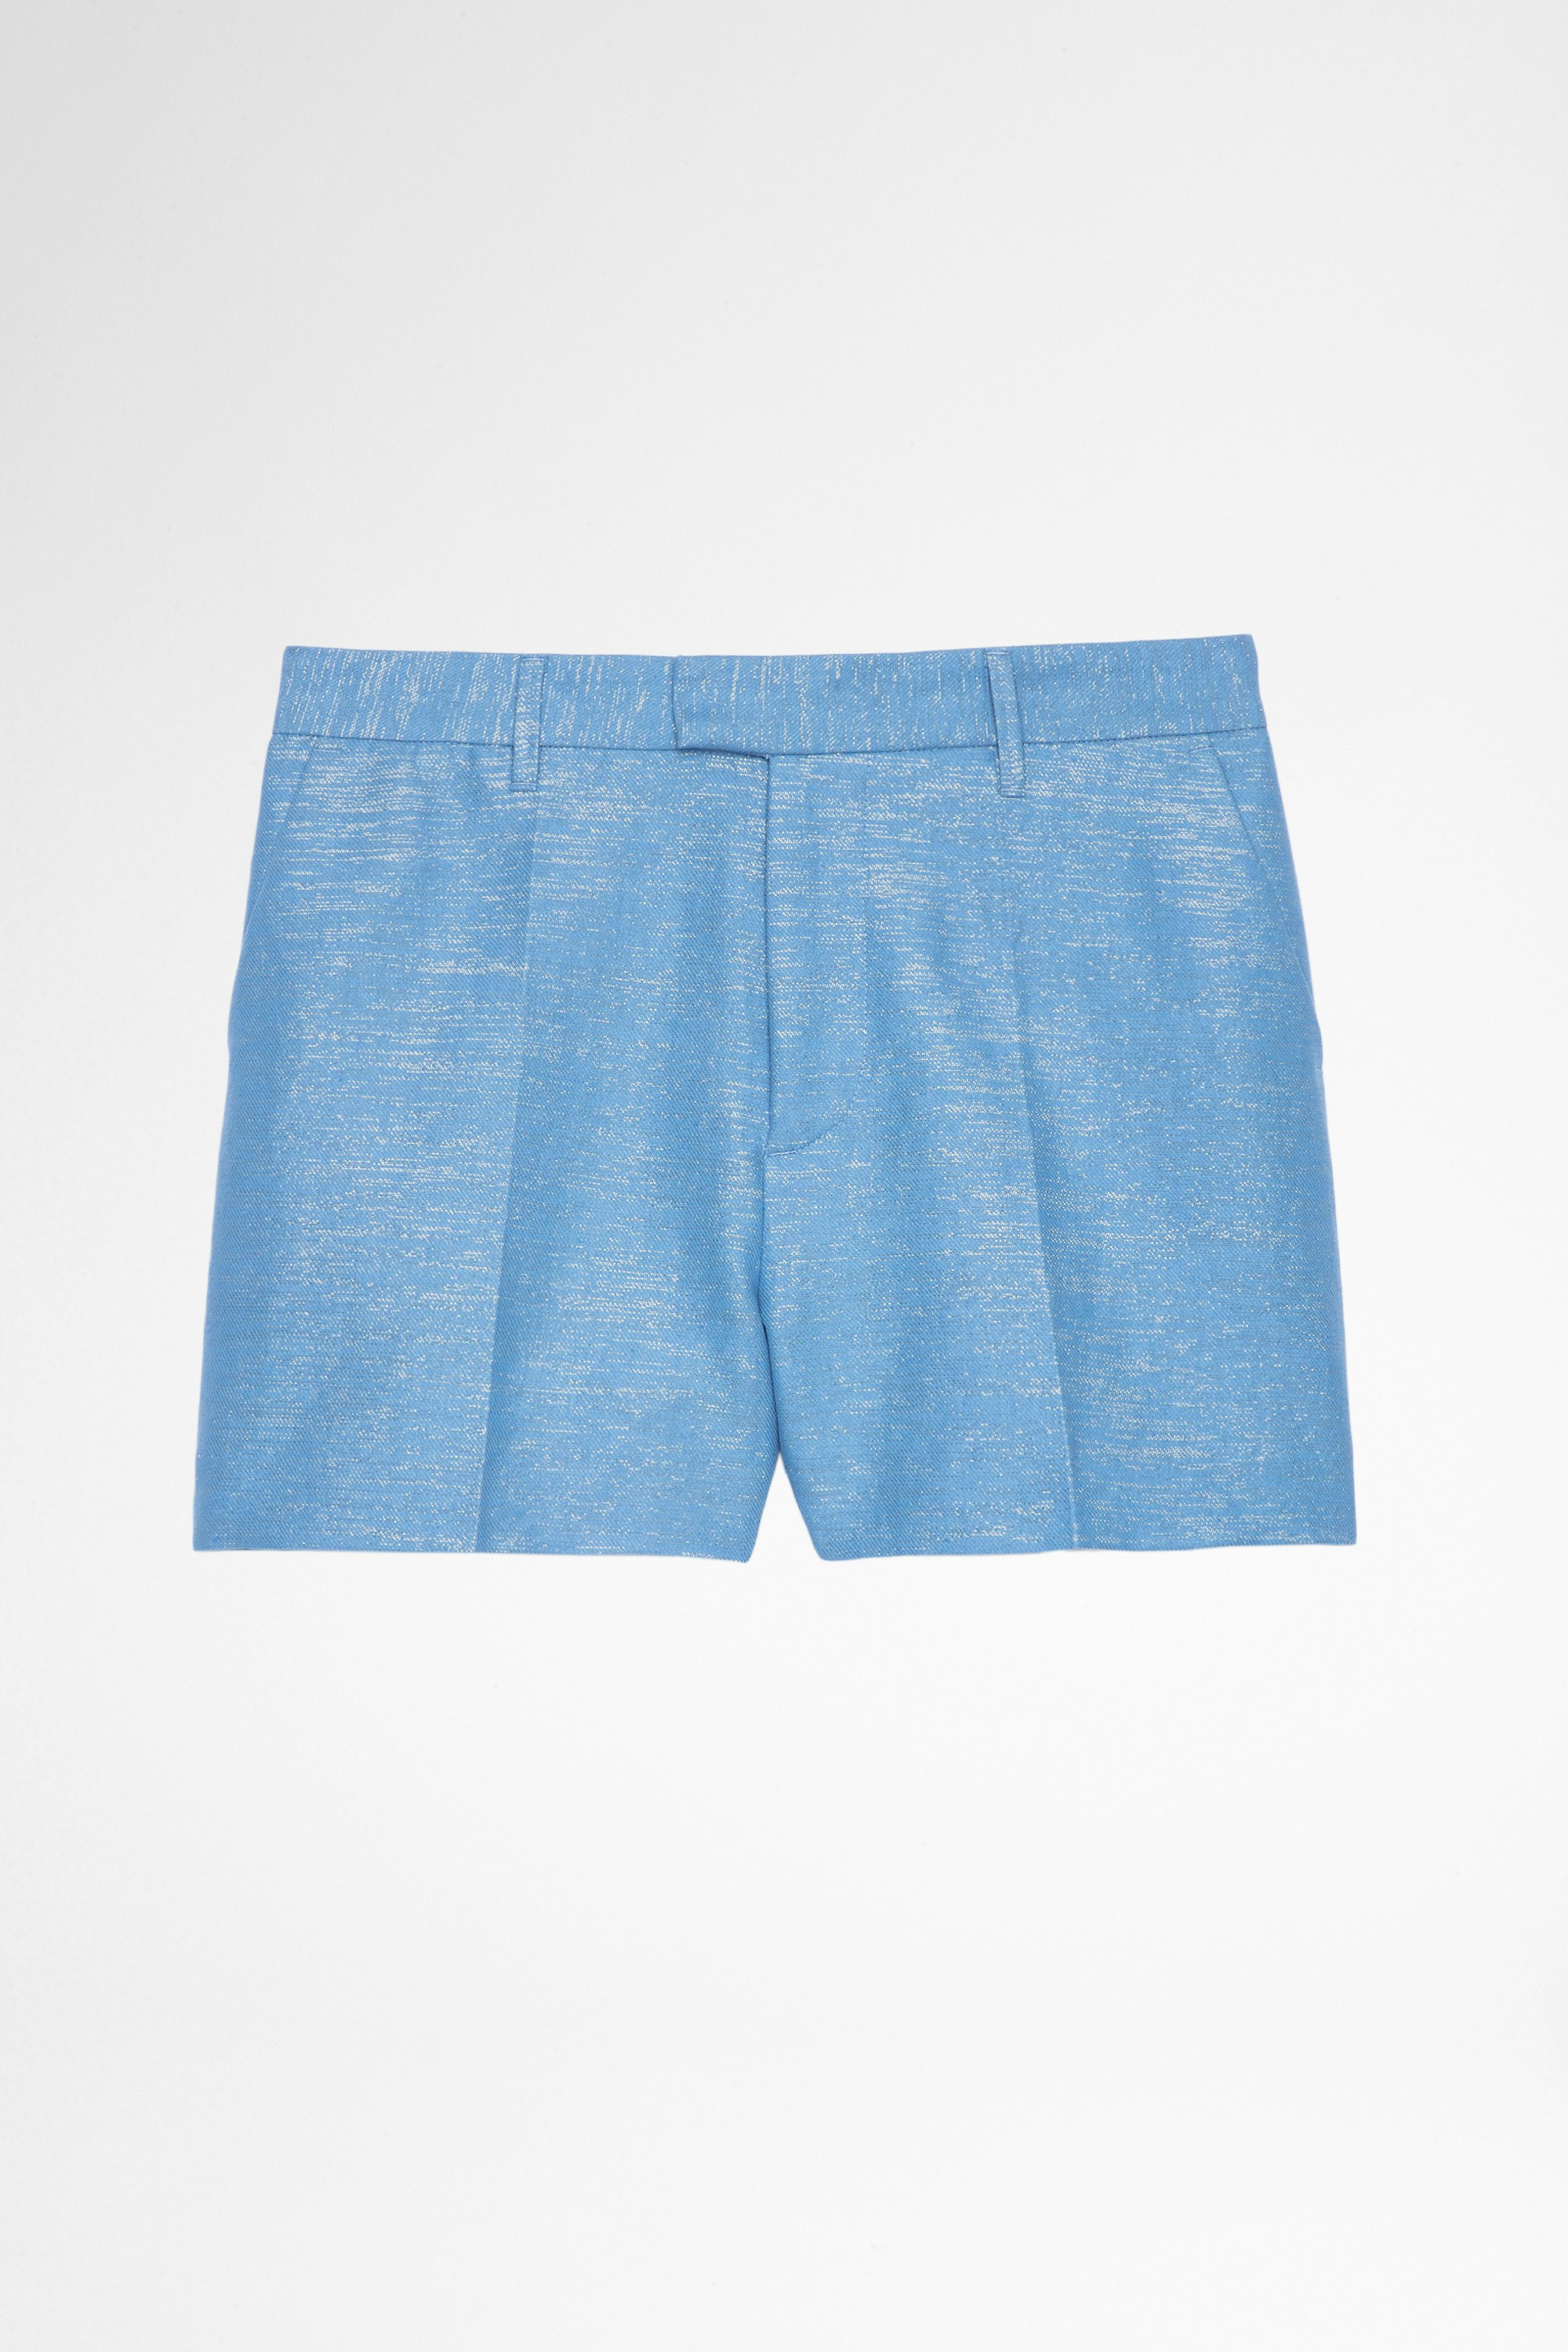 Please Shorts Leinen Women's linen and cotton shorts in sparkly sky-blue